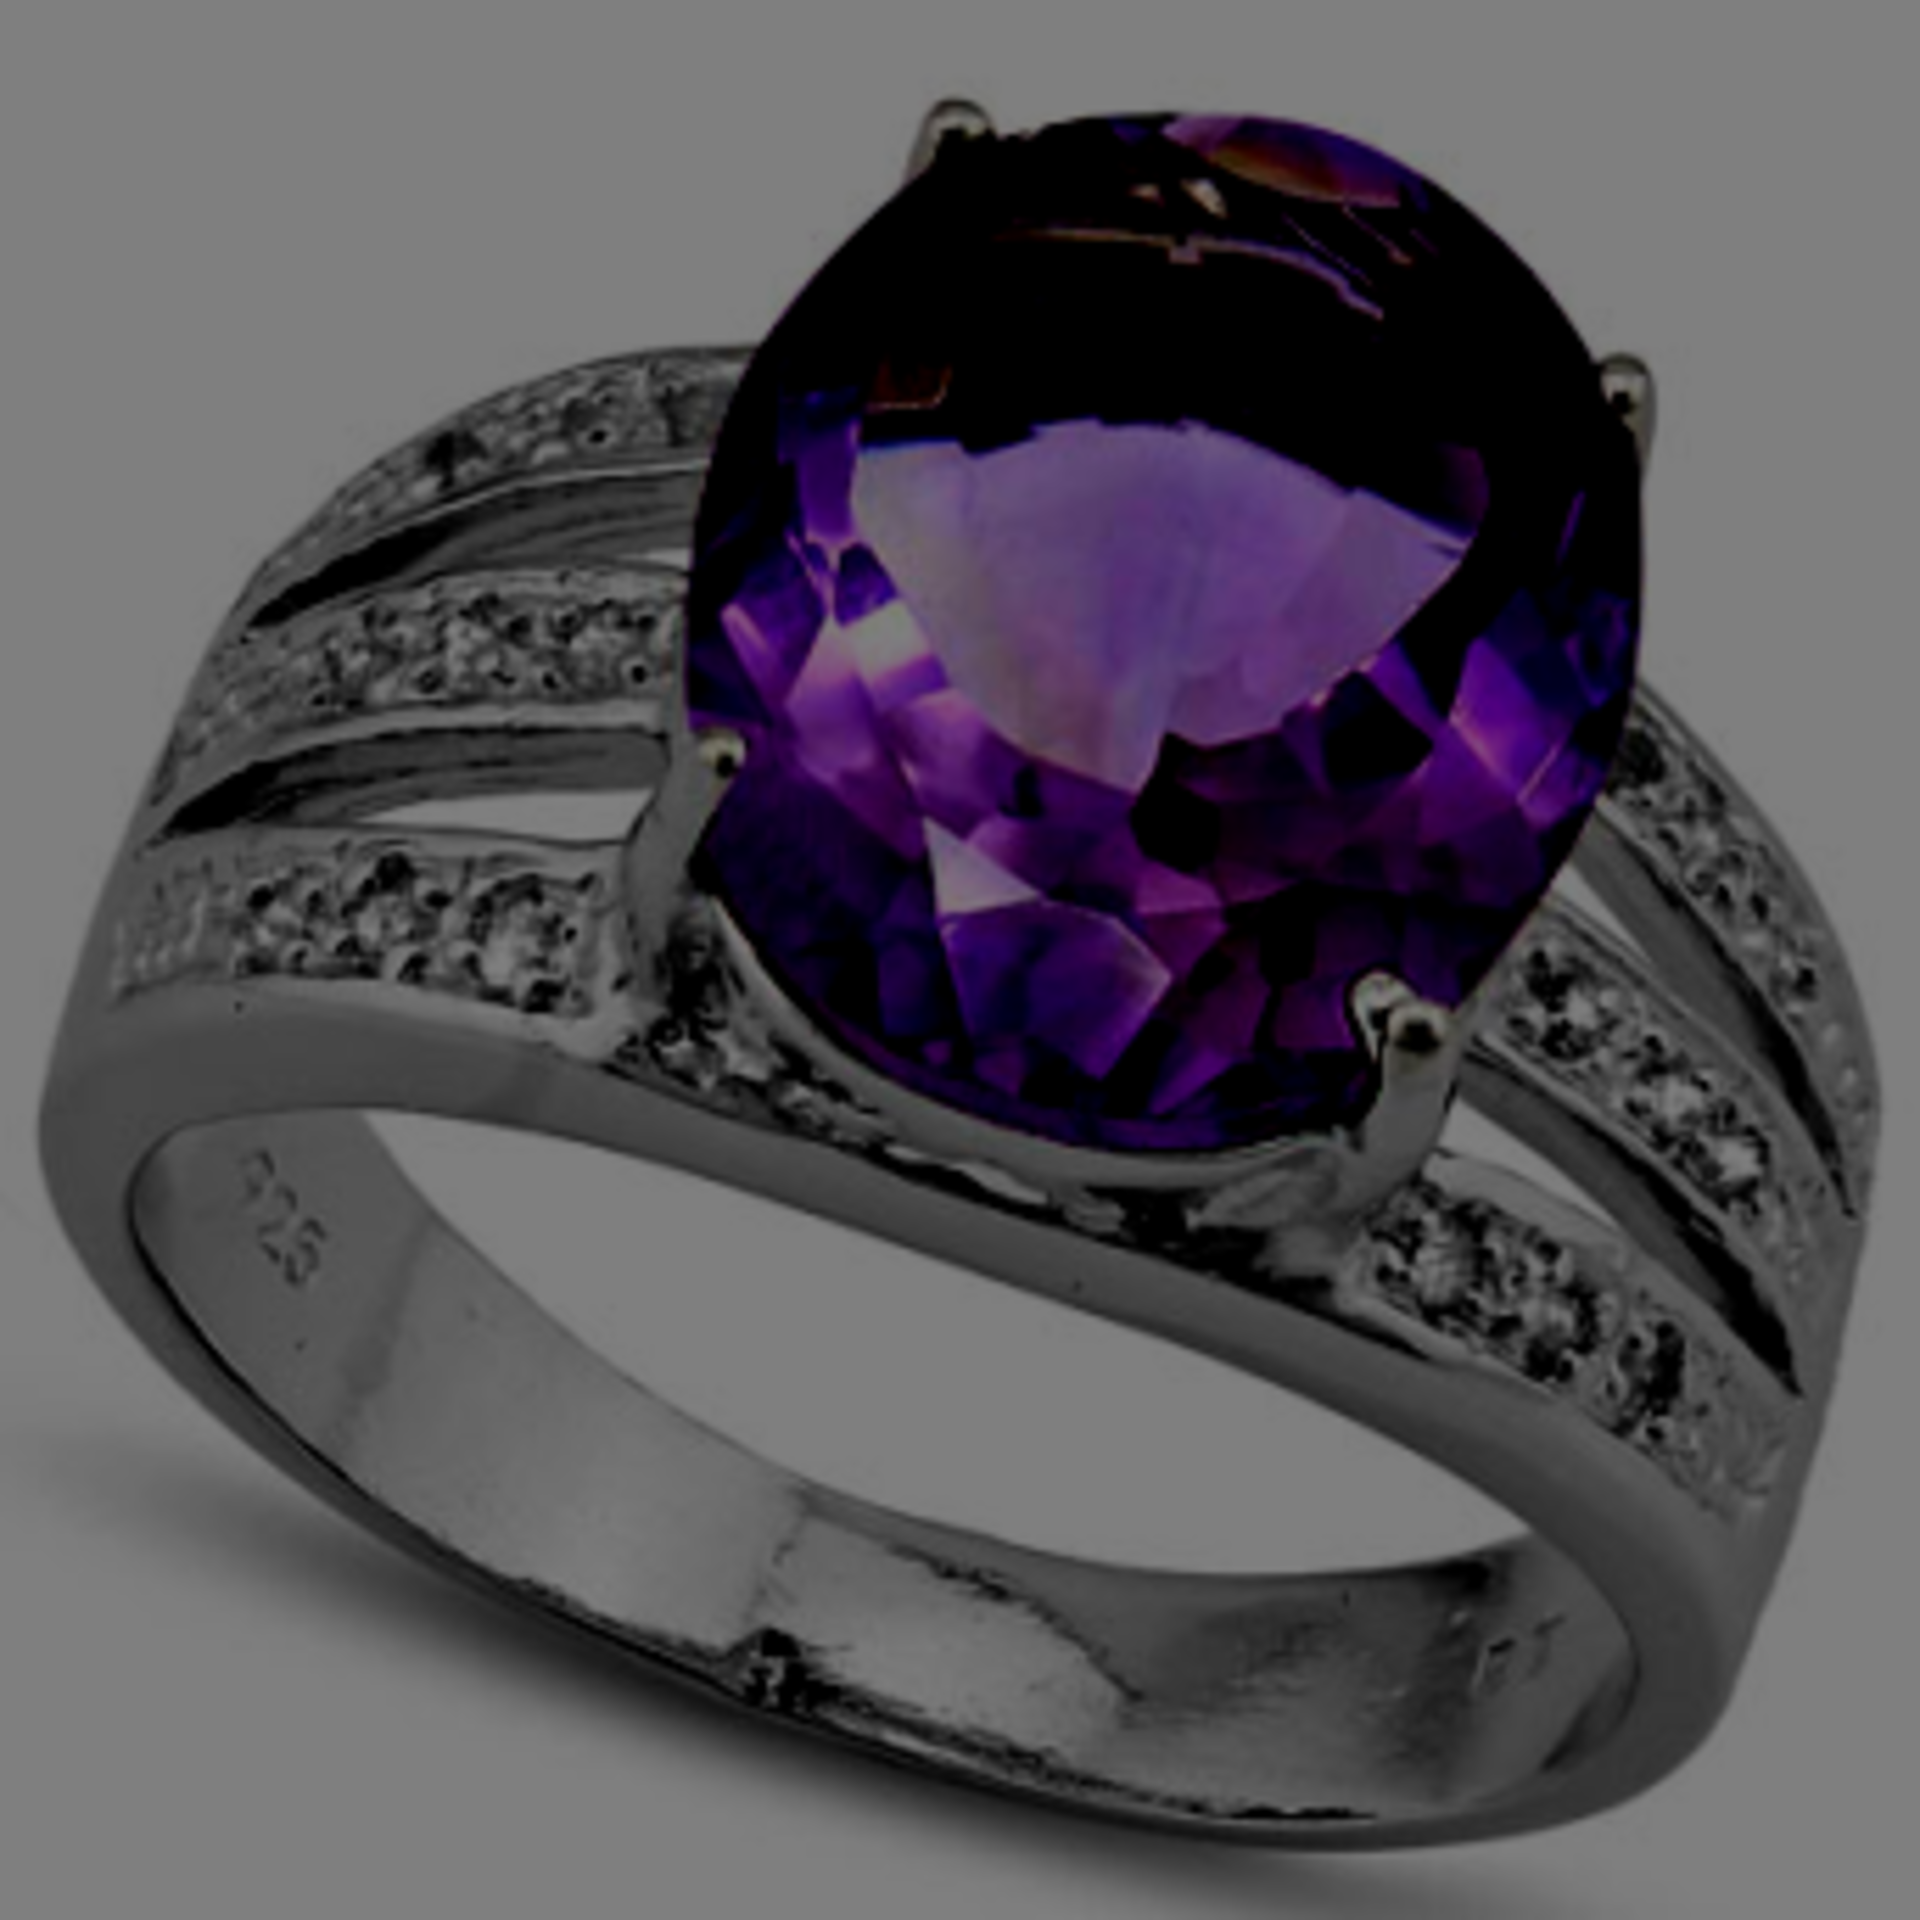 EXCELLENT 3.14 CARAT TW (19 PCS) GENUINE DIAMOND & AMETHYST 925 STERLING SILVER RING - Image 2 of 2